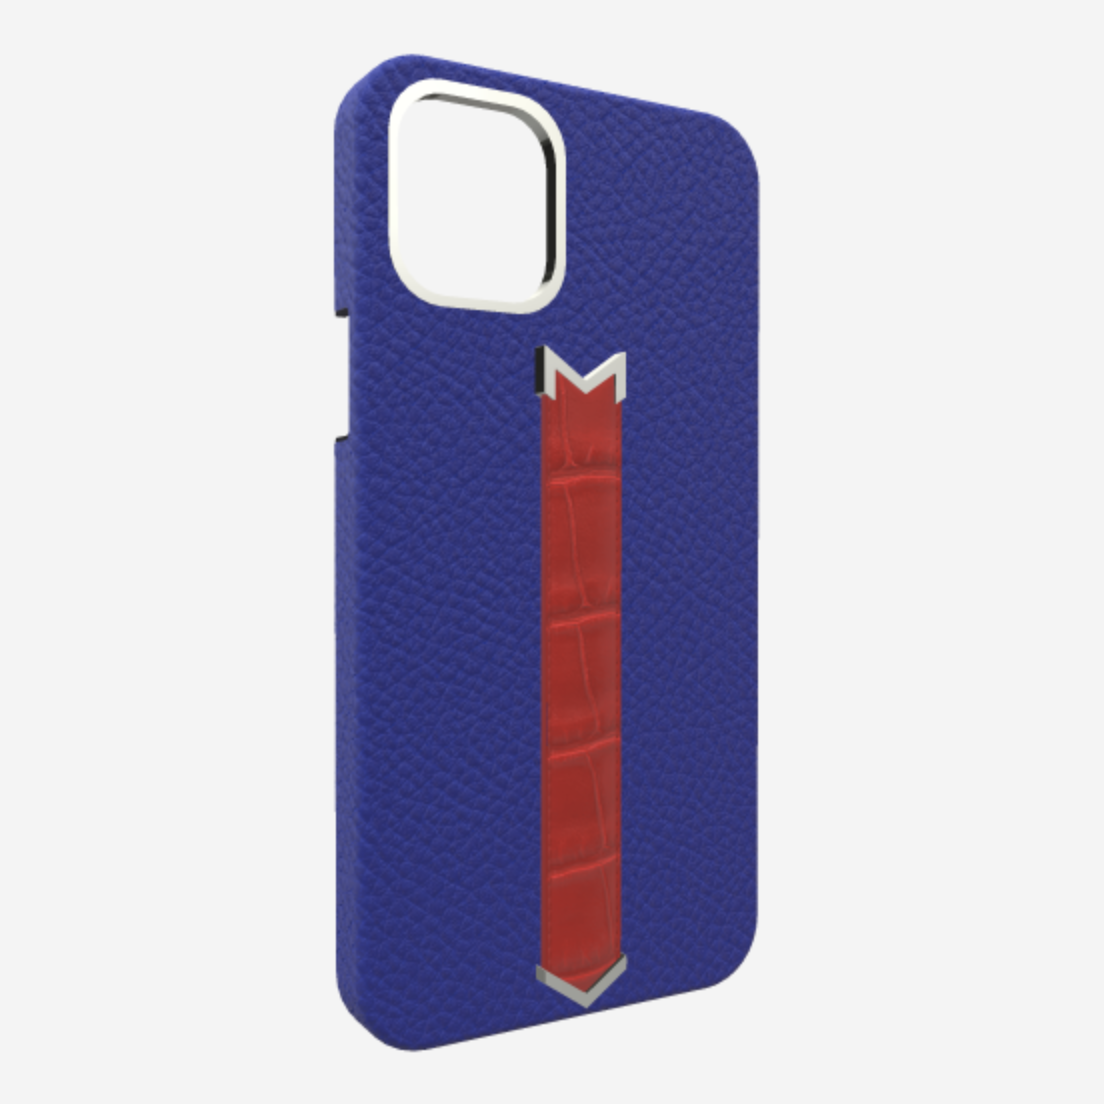 Silver Finger Strap Case for iPhone 13 in Genuine Calfskin and Alligator Electric-Blue Glamour-Red 